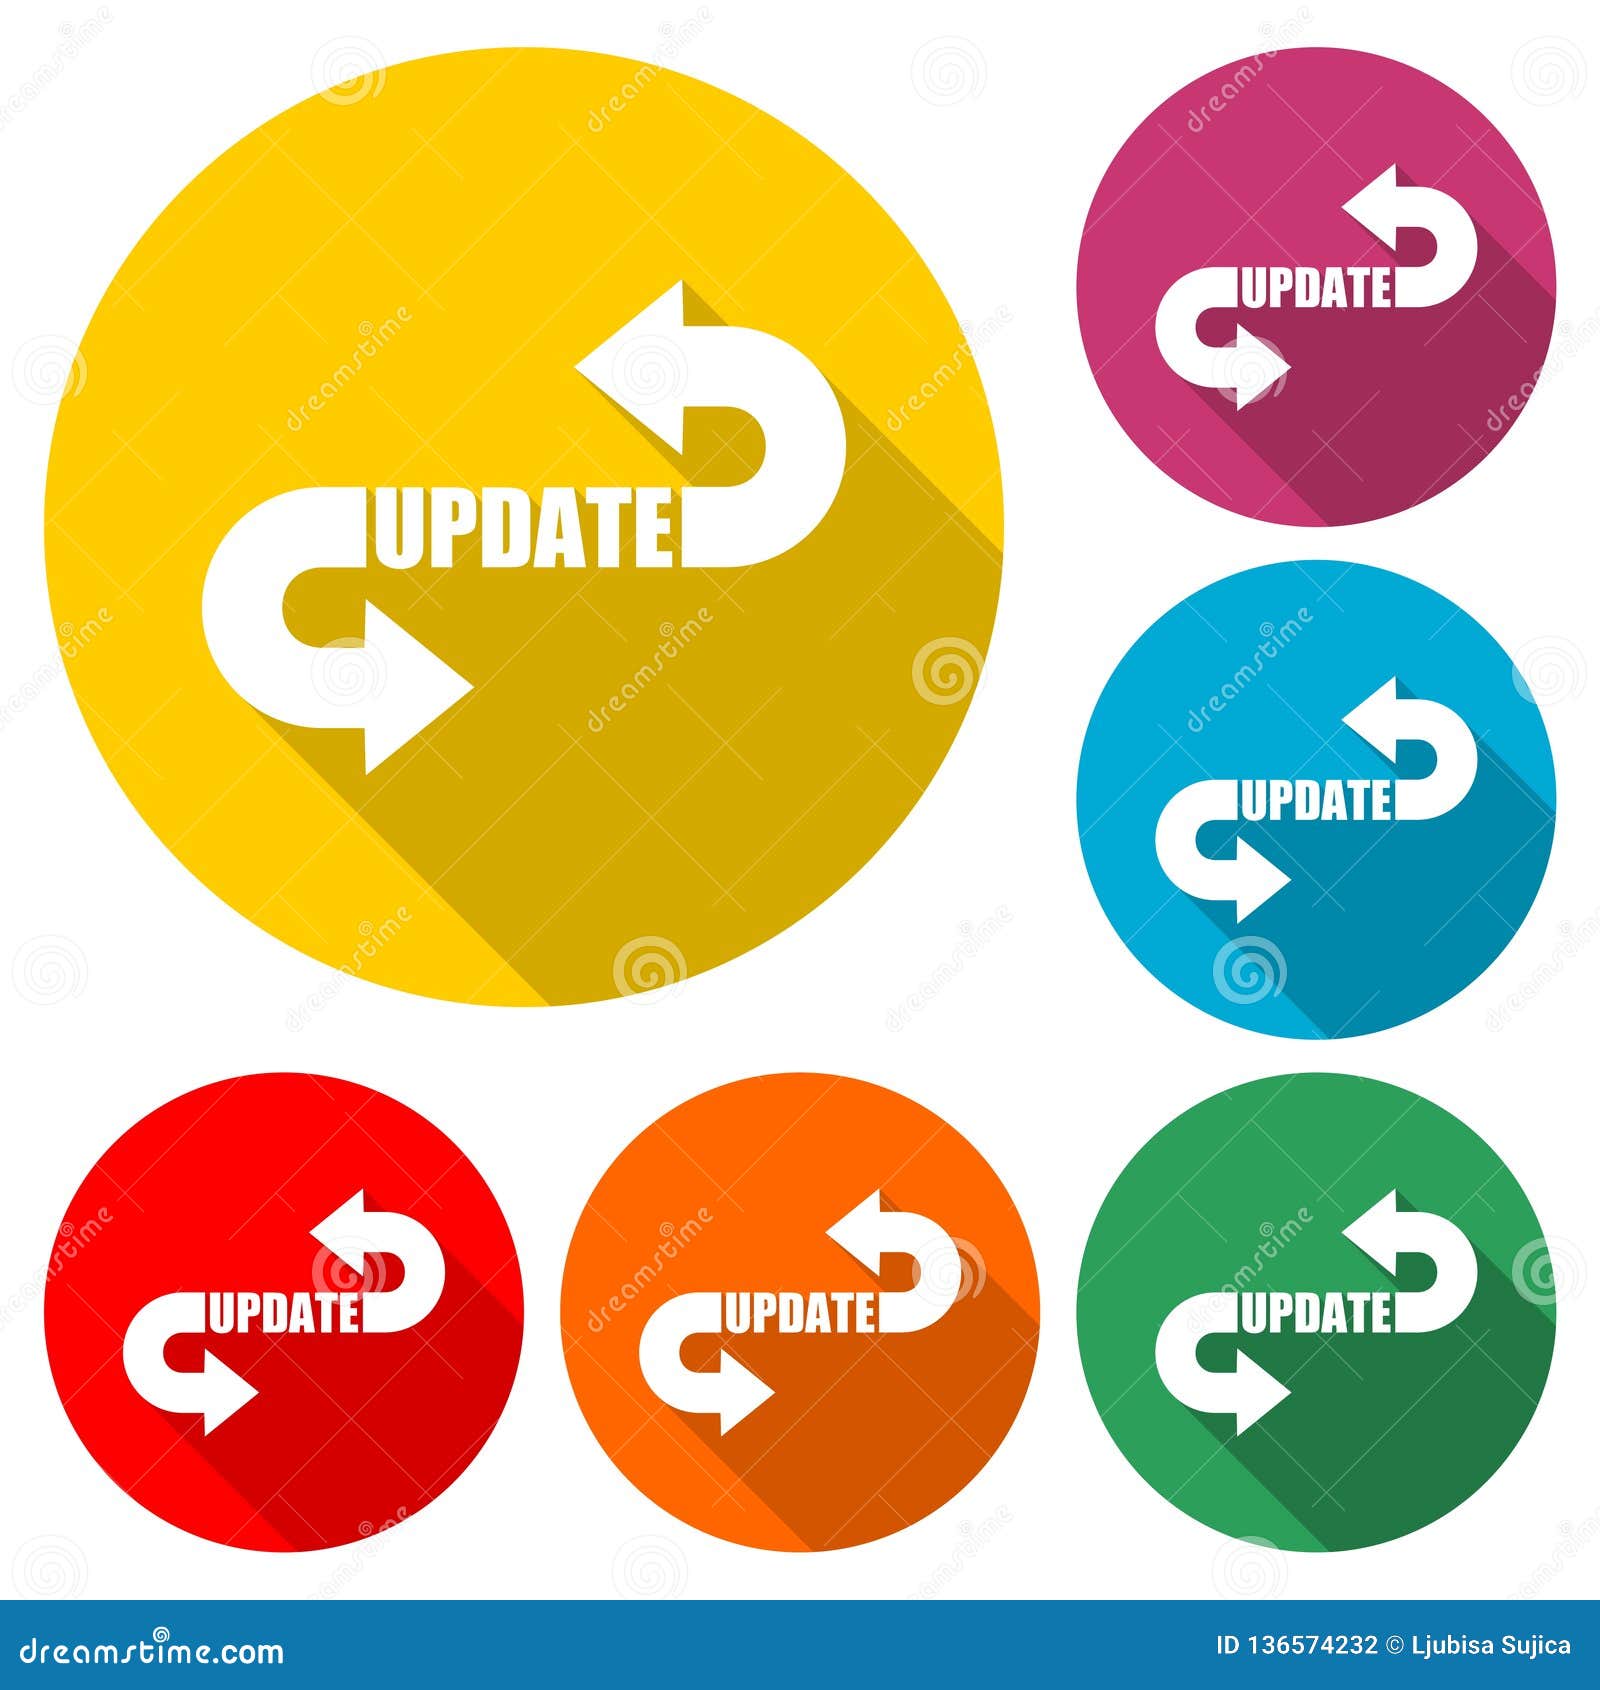 Update Software Sticker or Logo, Concept Meaning Replacing Program